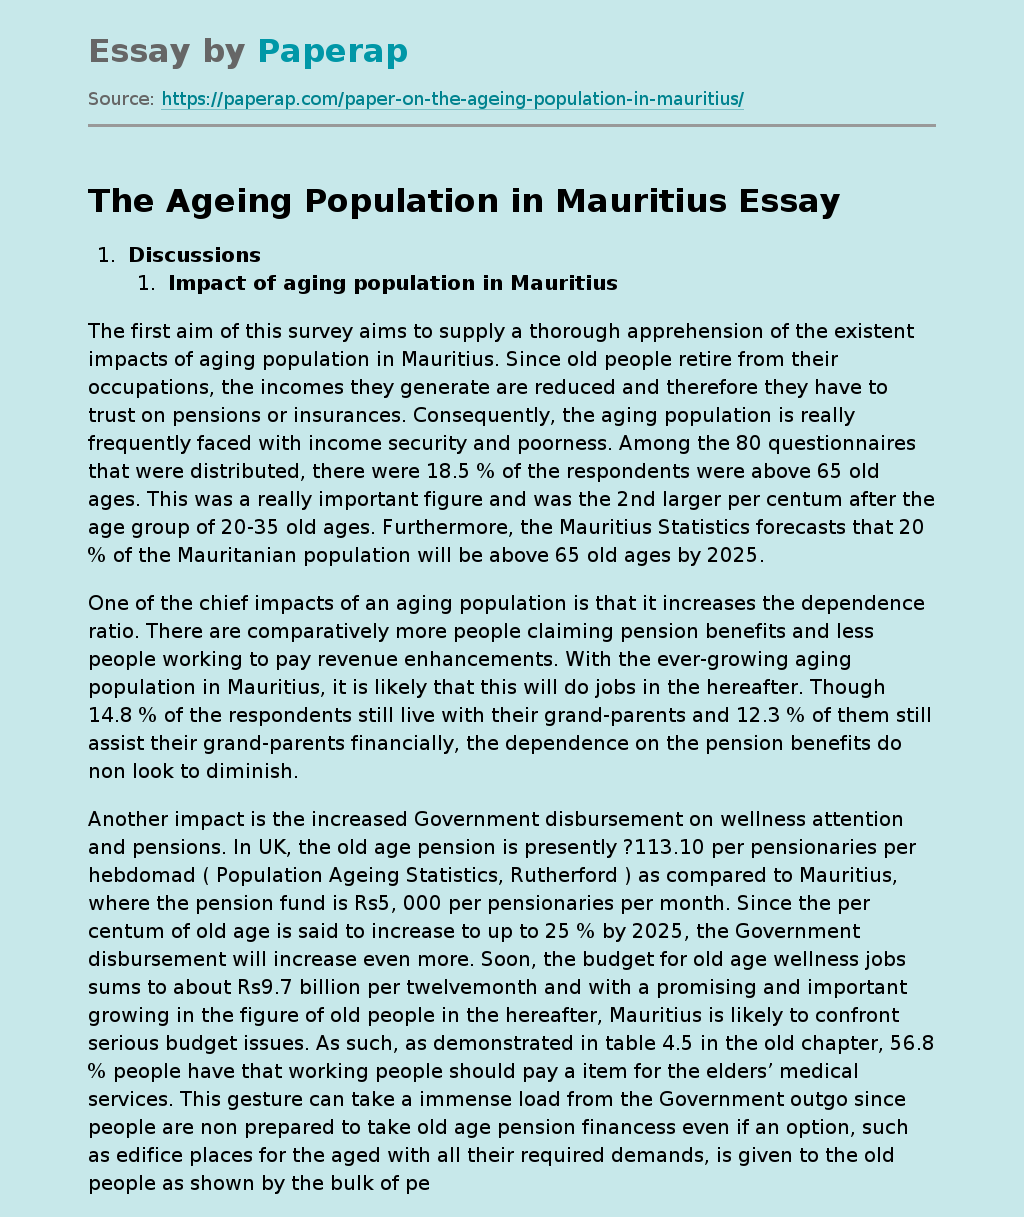 The Ageing Population in Mauritius